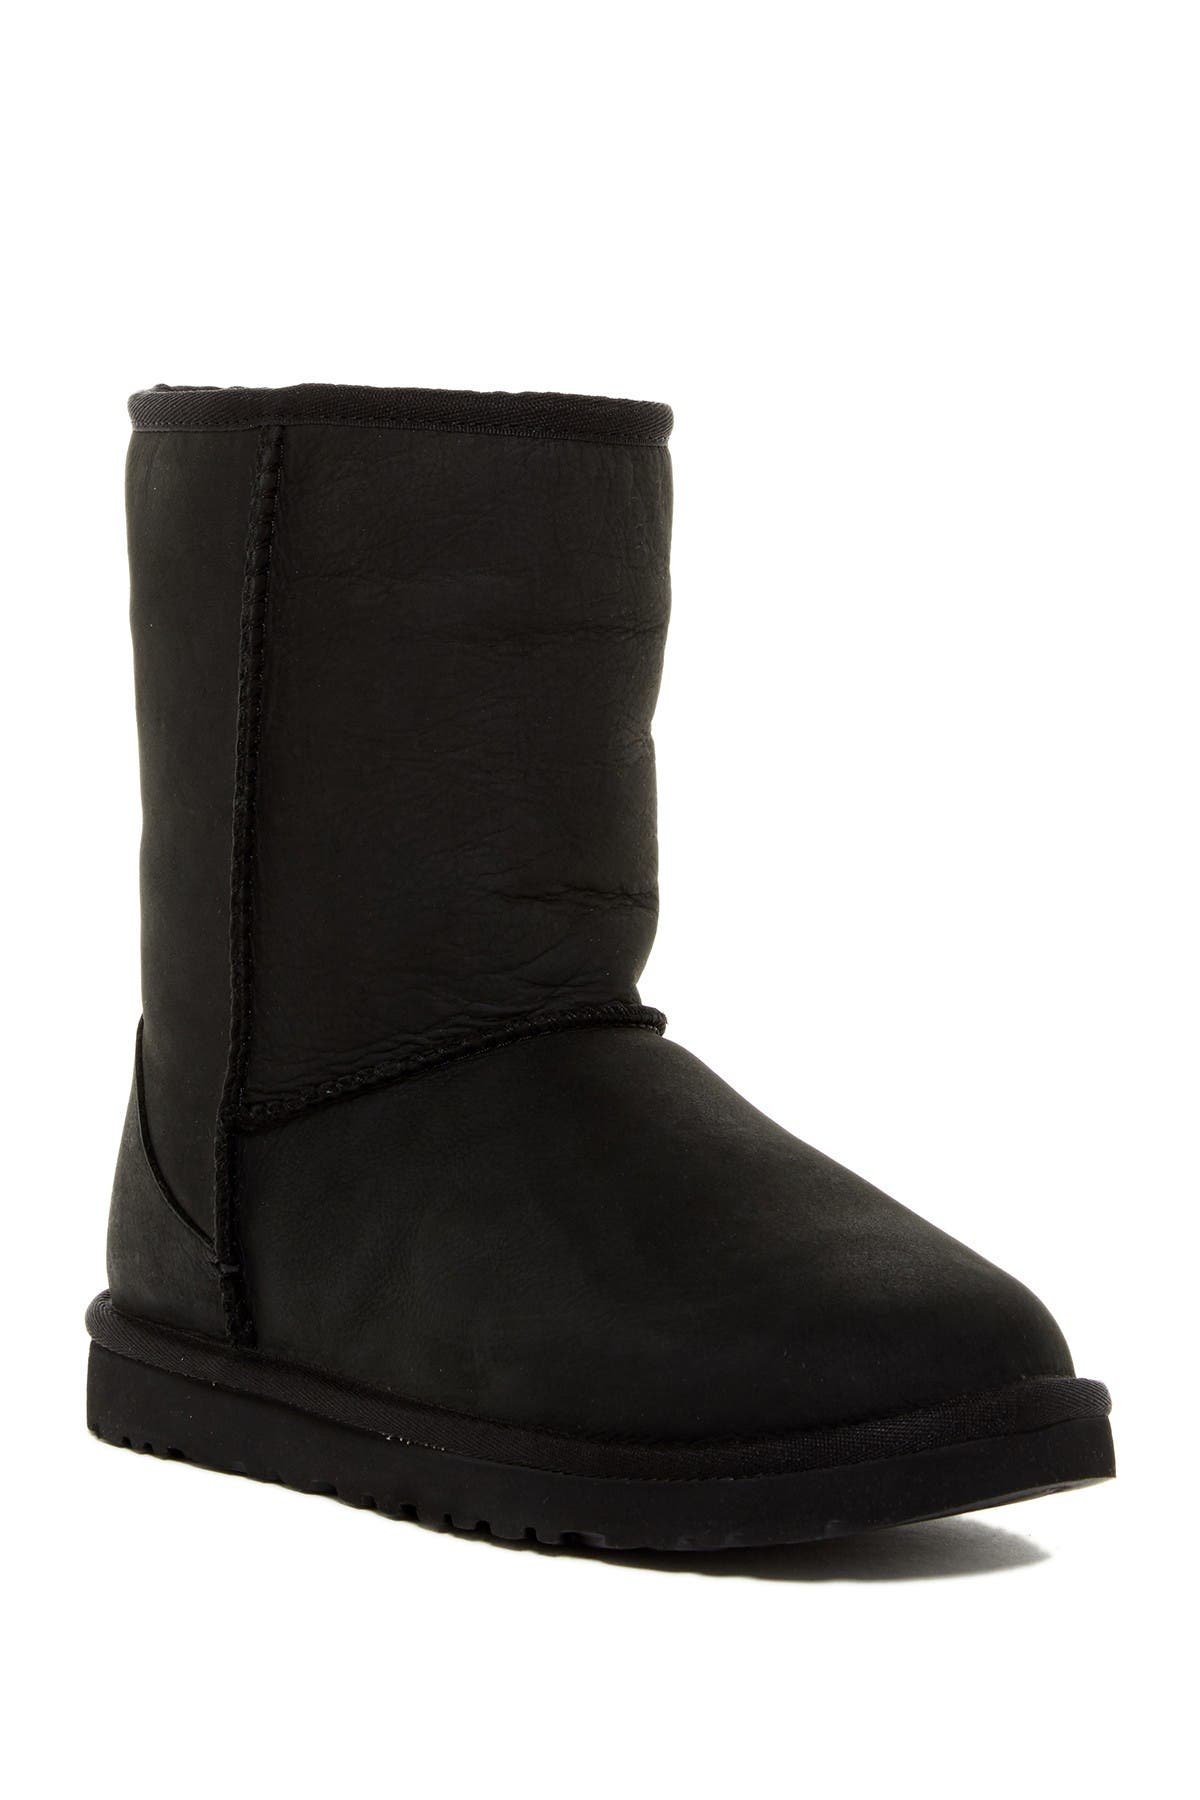 uggs short leather boots